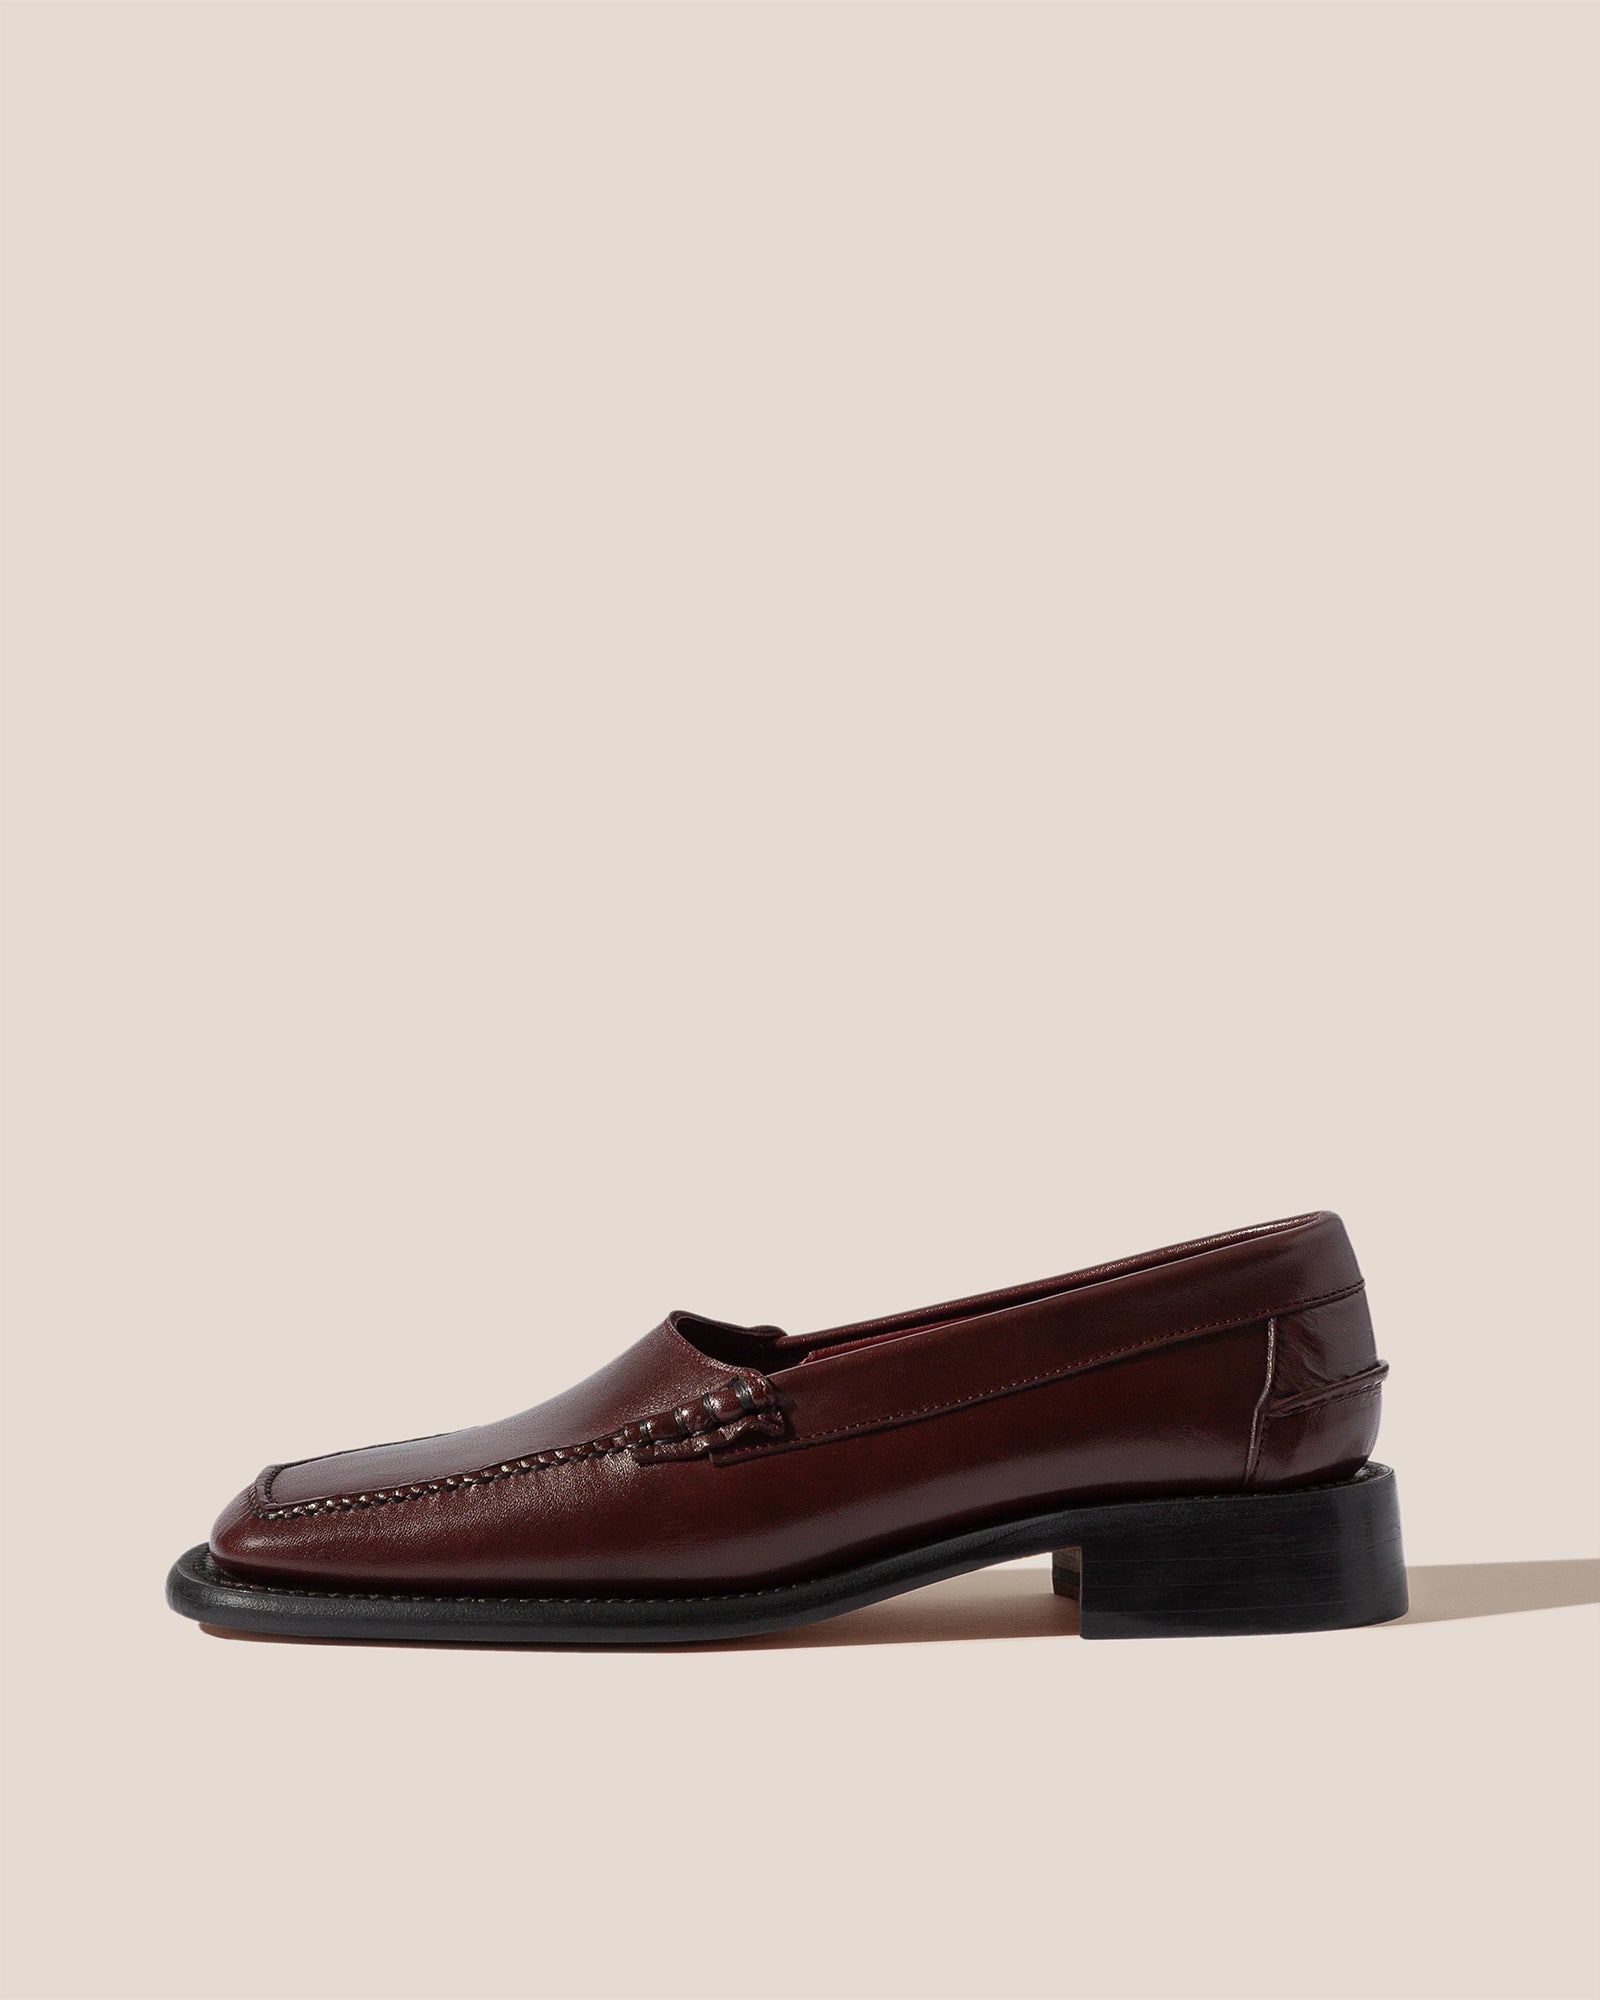 Leather Loafers Shoes, Leather Oxford Shoes